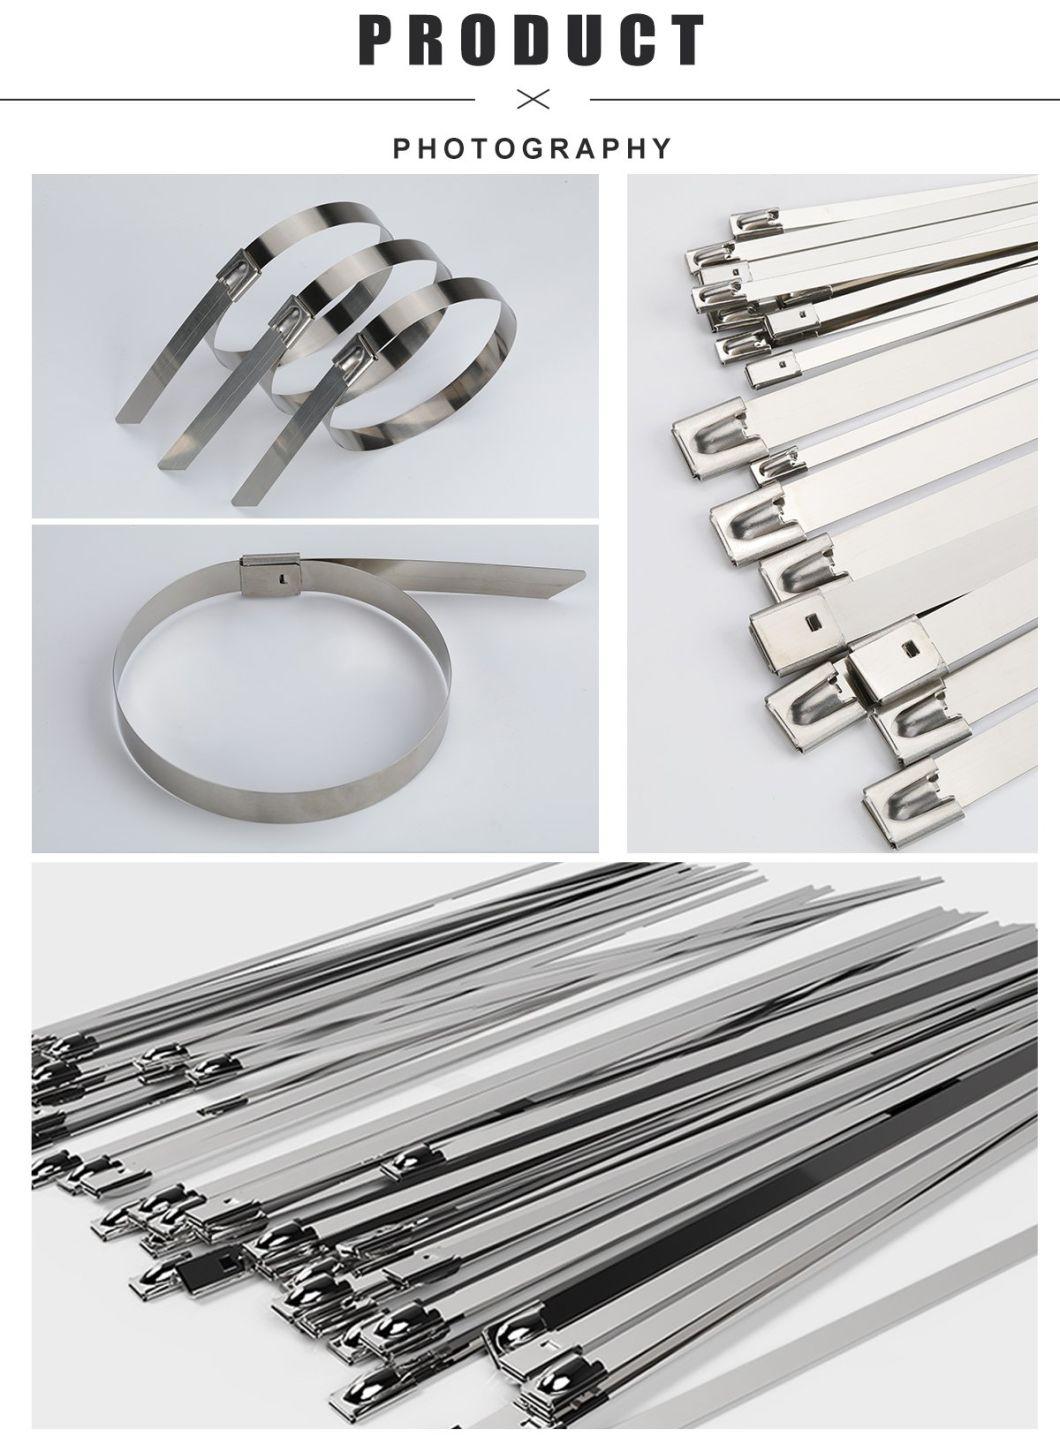 Electrical Products Hot Sale Ball-Lock Type Stainless Steel Cable Tie